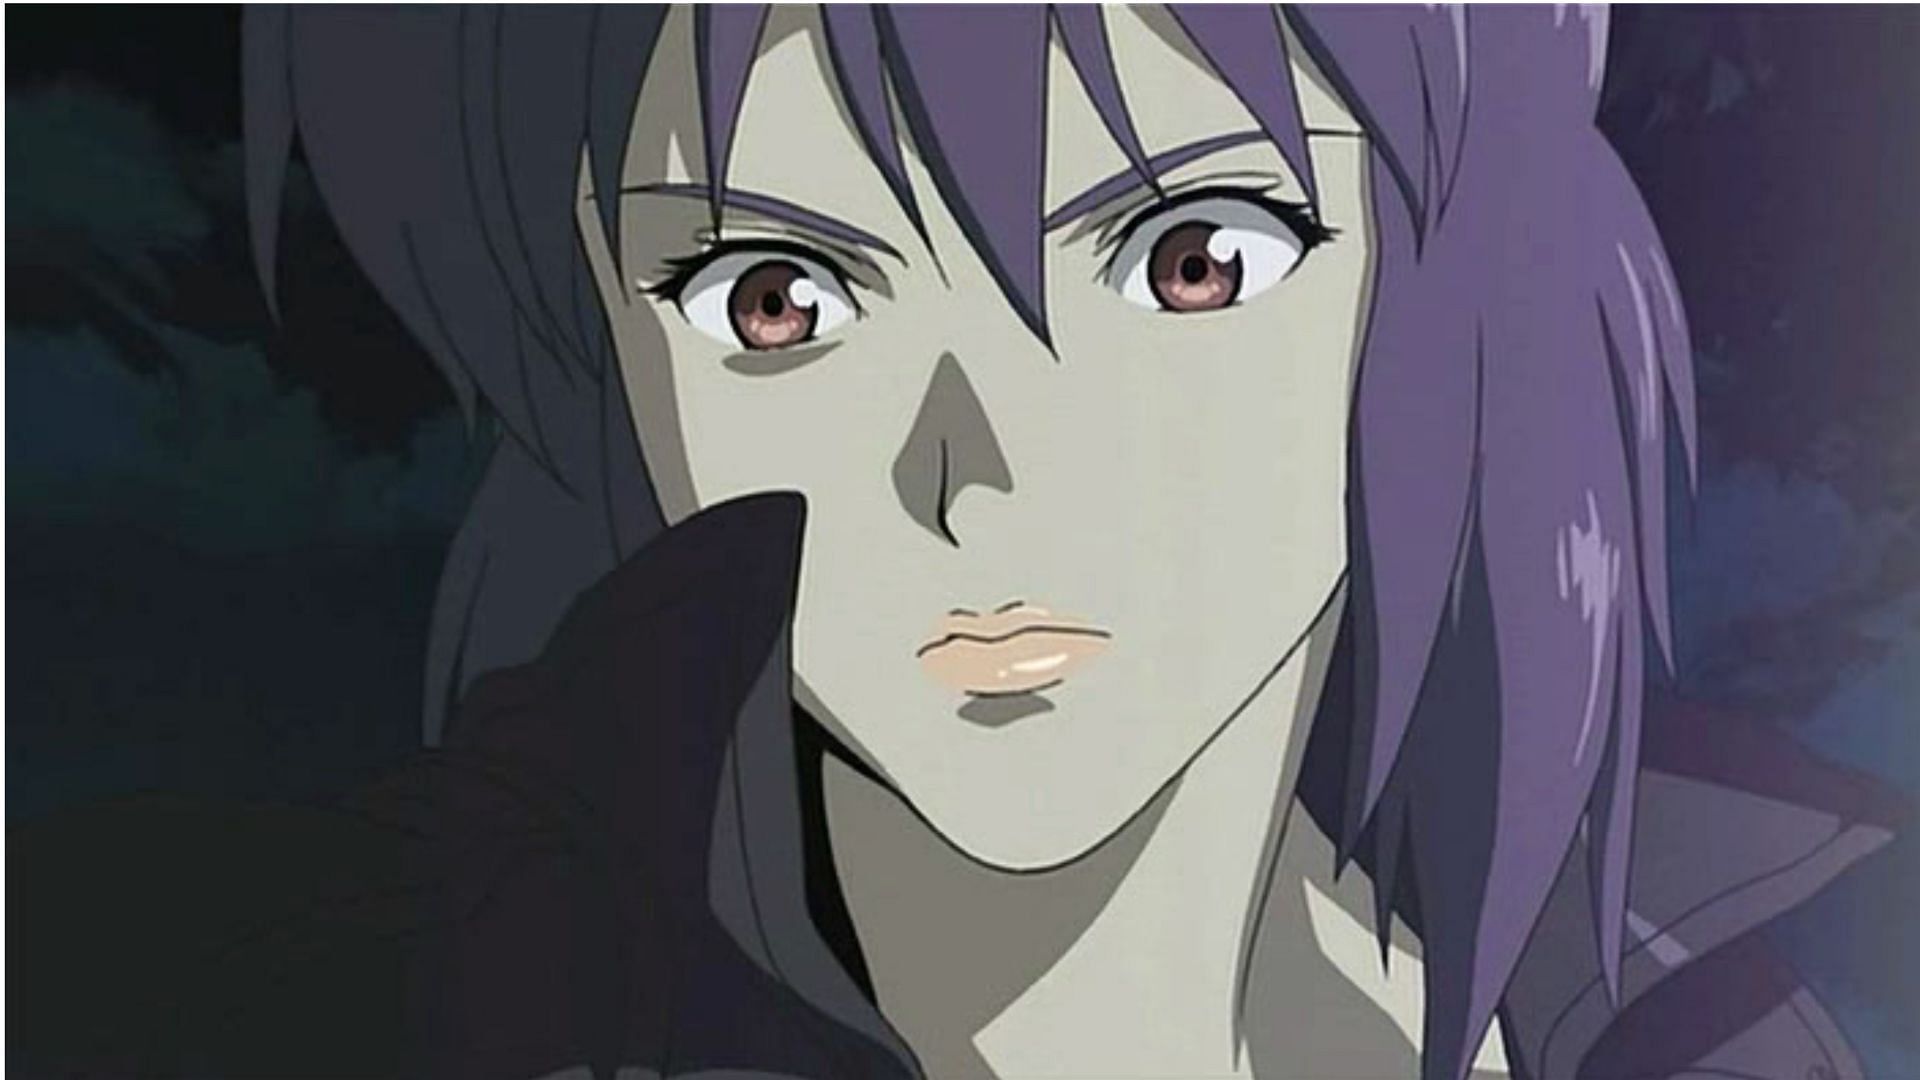 Motoko Kusanagi as seen in Ghost in the Shell: Stand Alone Complex (Image via Production I.G)